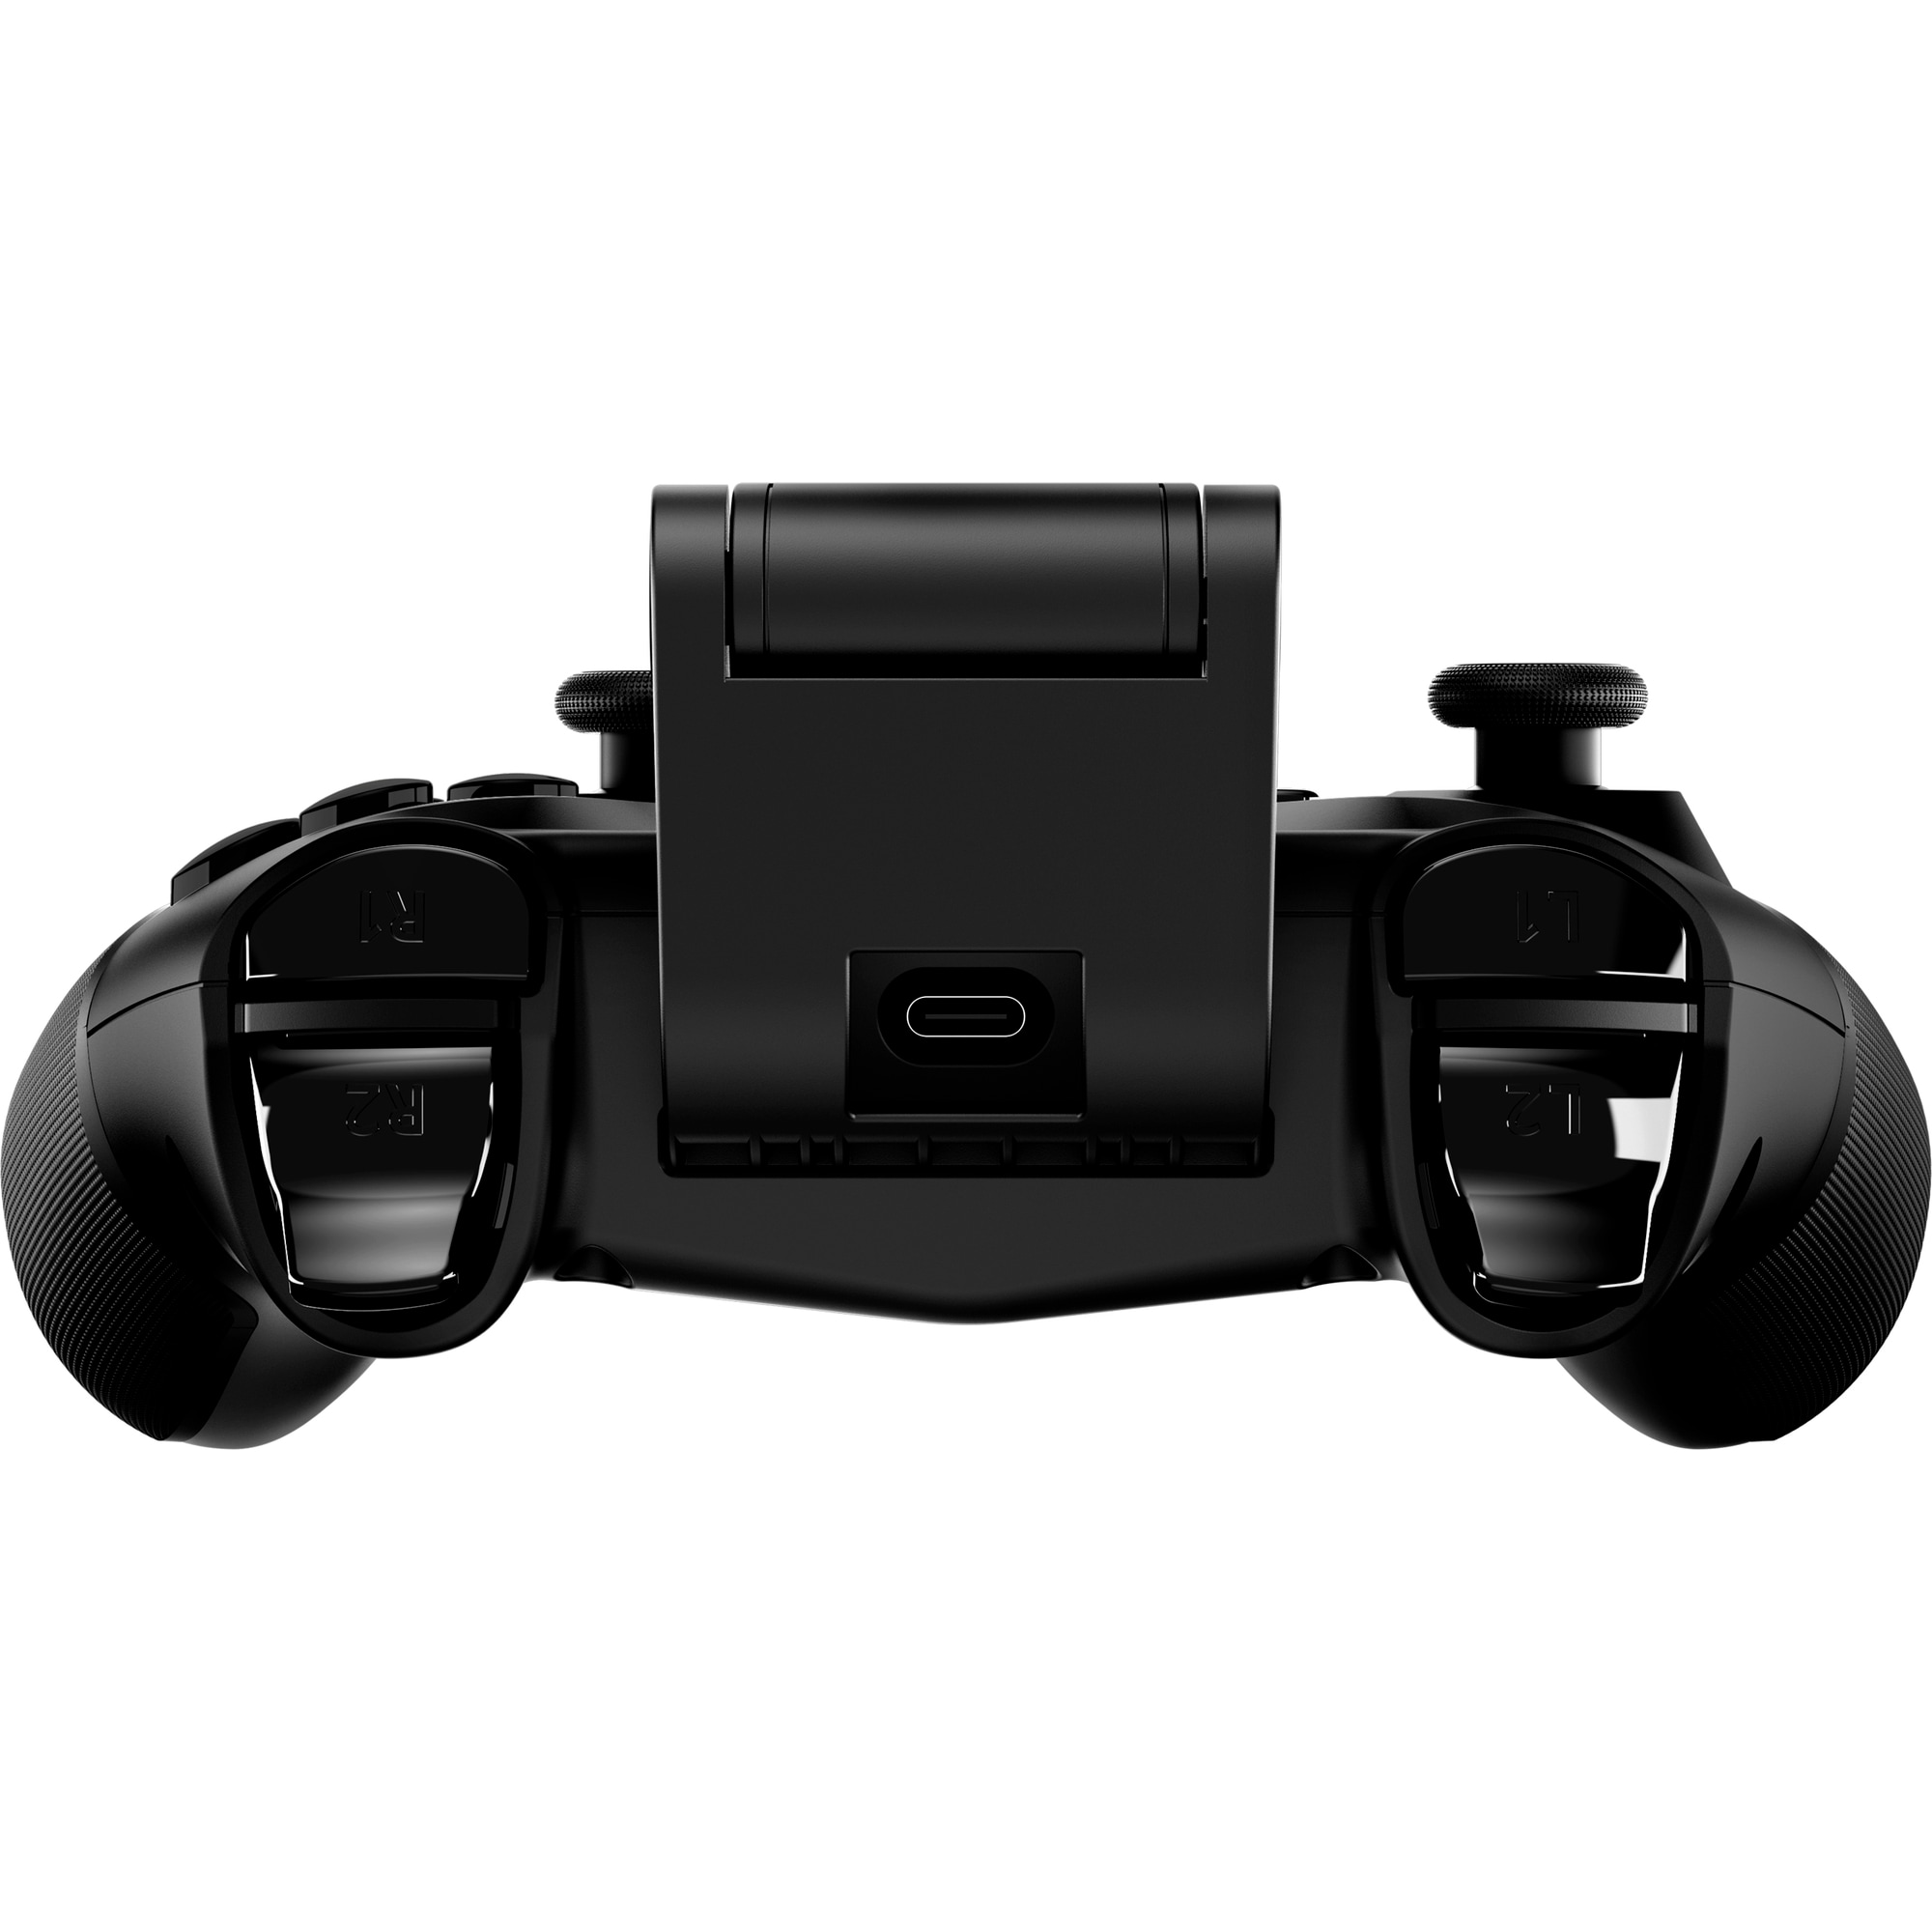 HyperX Clutch - Wireless Gaming Controller (Black) - Mobile-PC (HCRC1-D-BK G) - Mobile Accessories5 